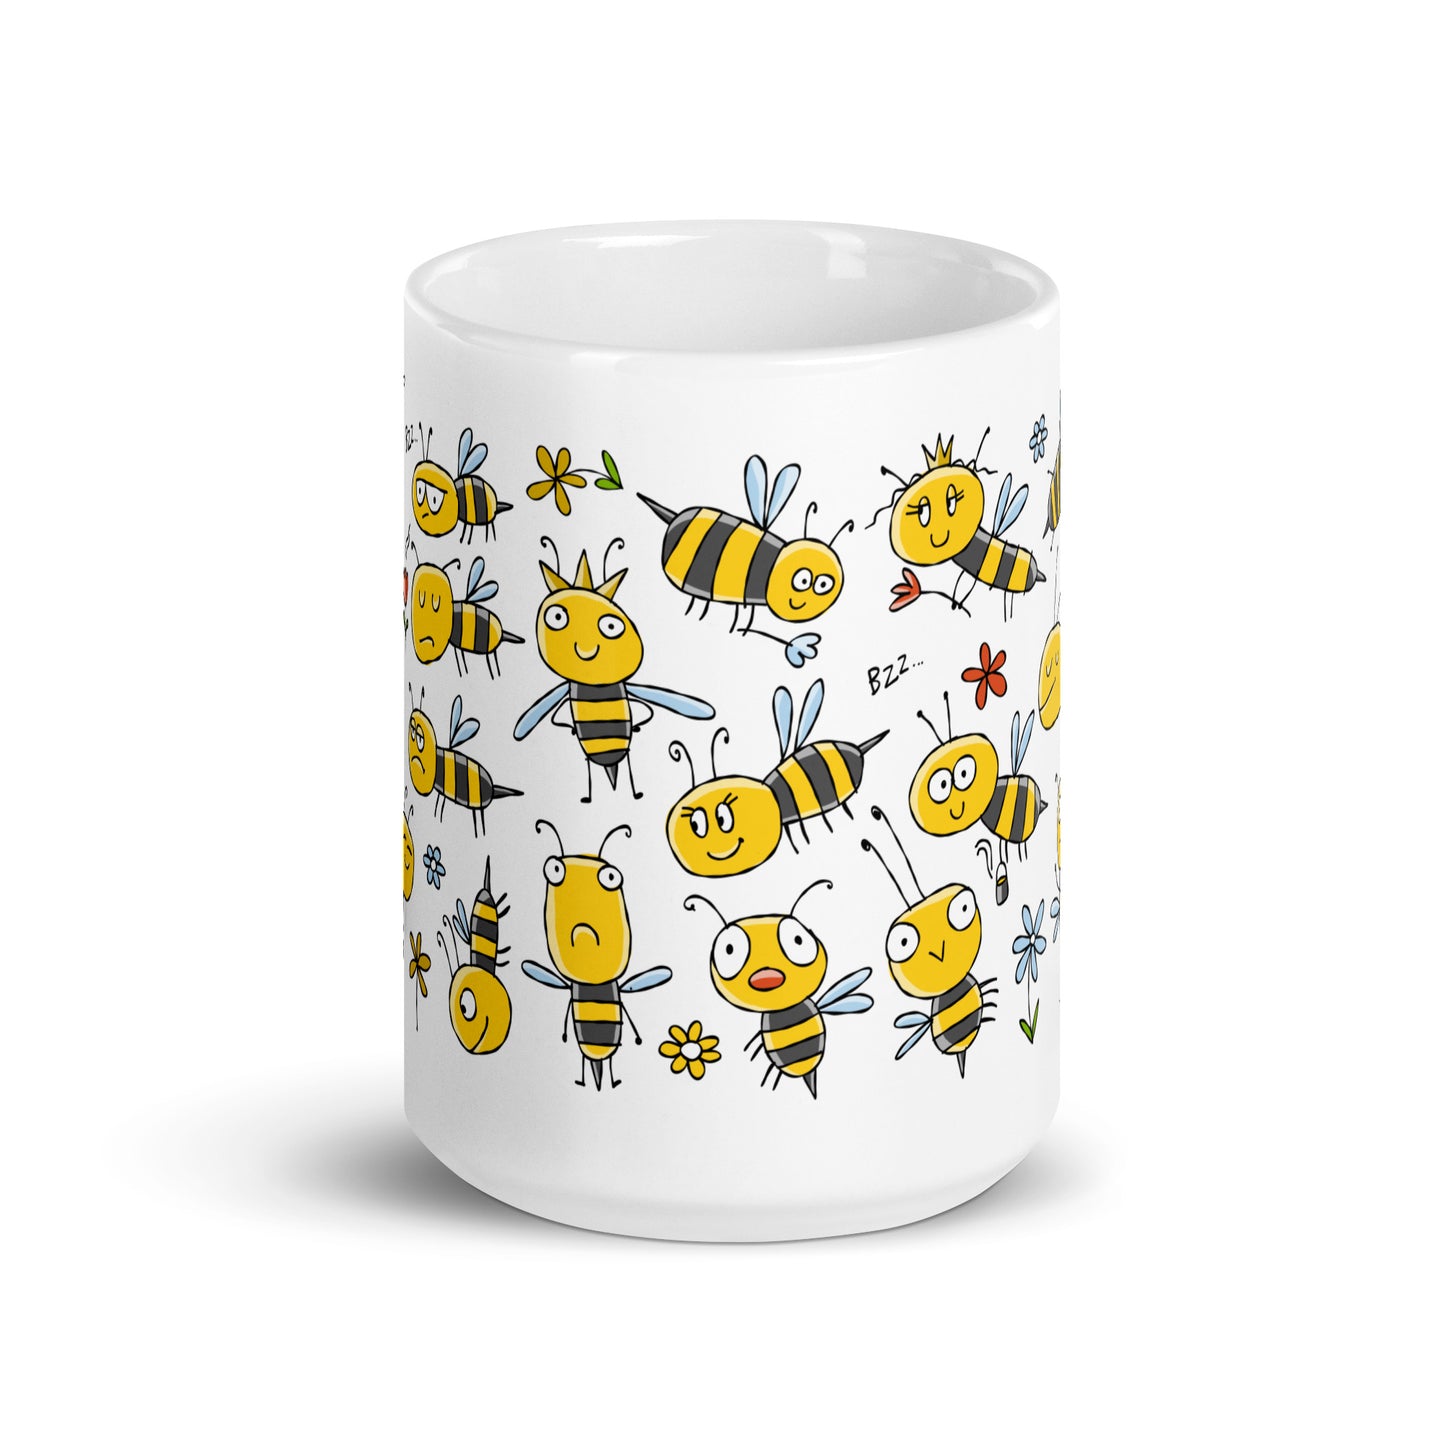 15 oz ceramic mug with Beehive print - funny and cute yellow bees characters.